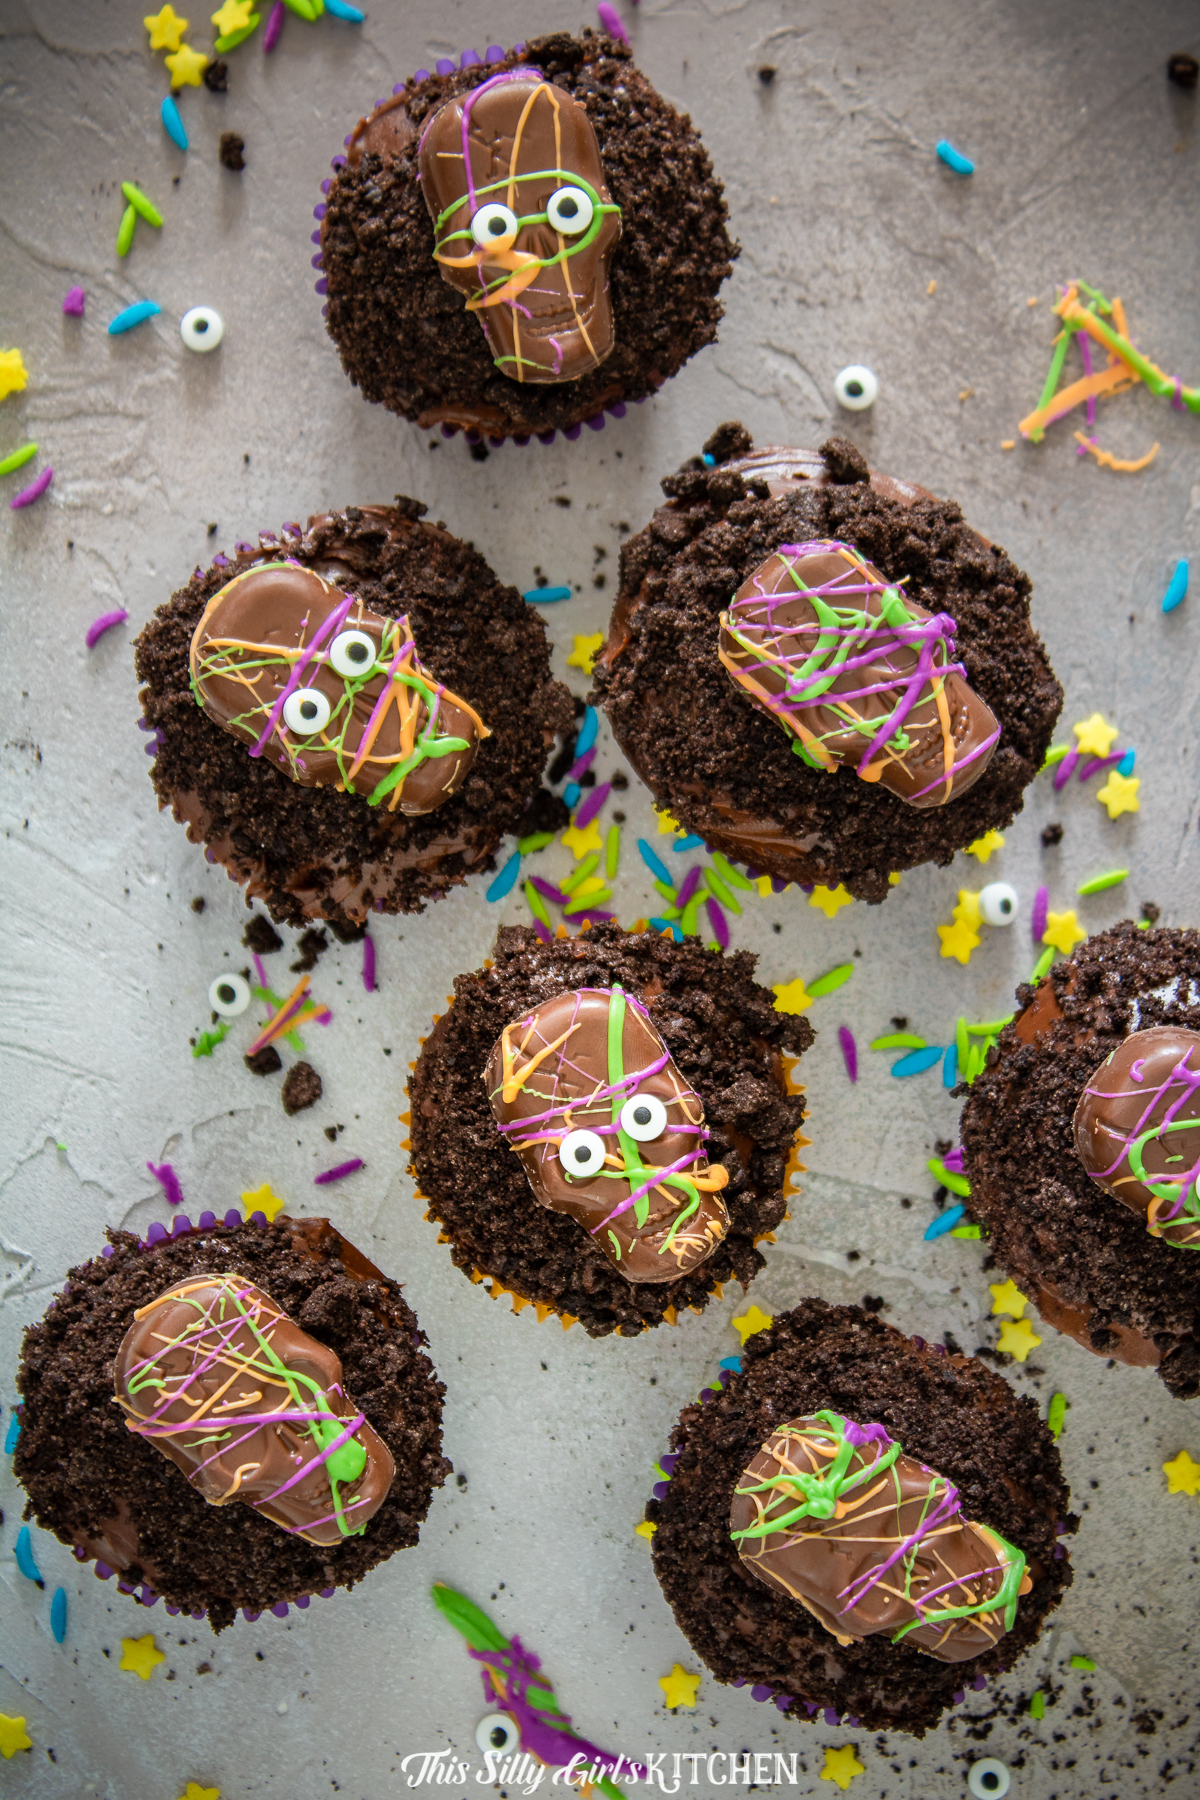 Monster Halloween Cupcakes are a festive treat to serve during the fall season. Perfect for parties or as an after trick-or-treating snack!